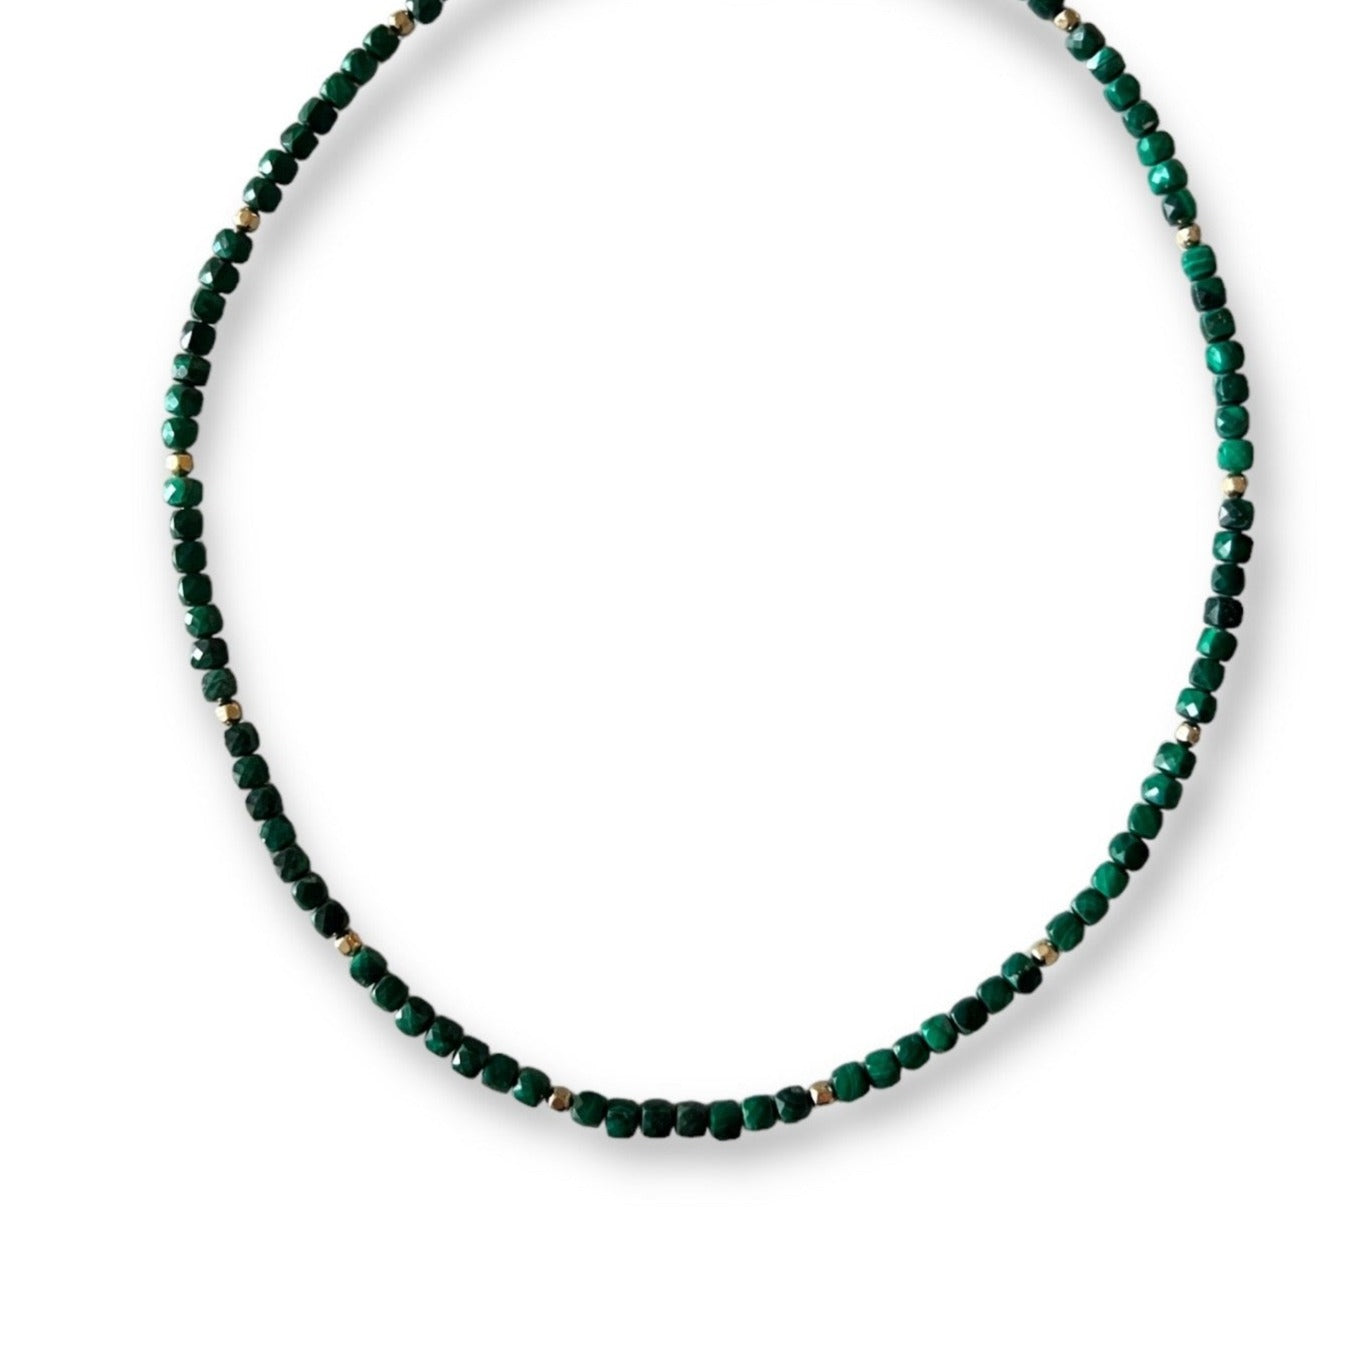 Malachite Cubed Gold Filled Beaded Necklace